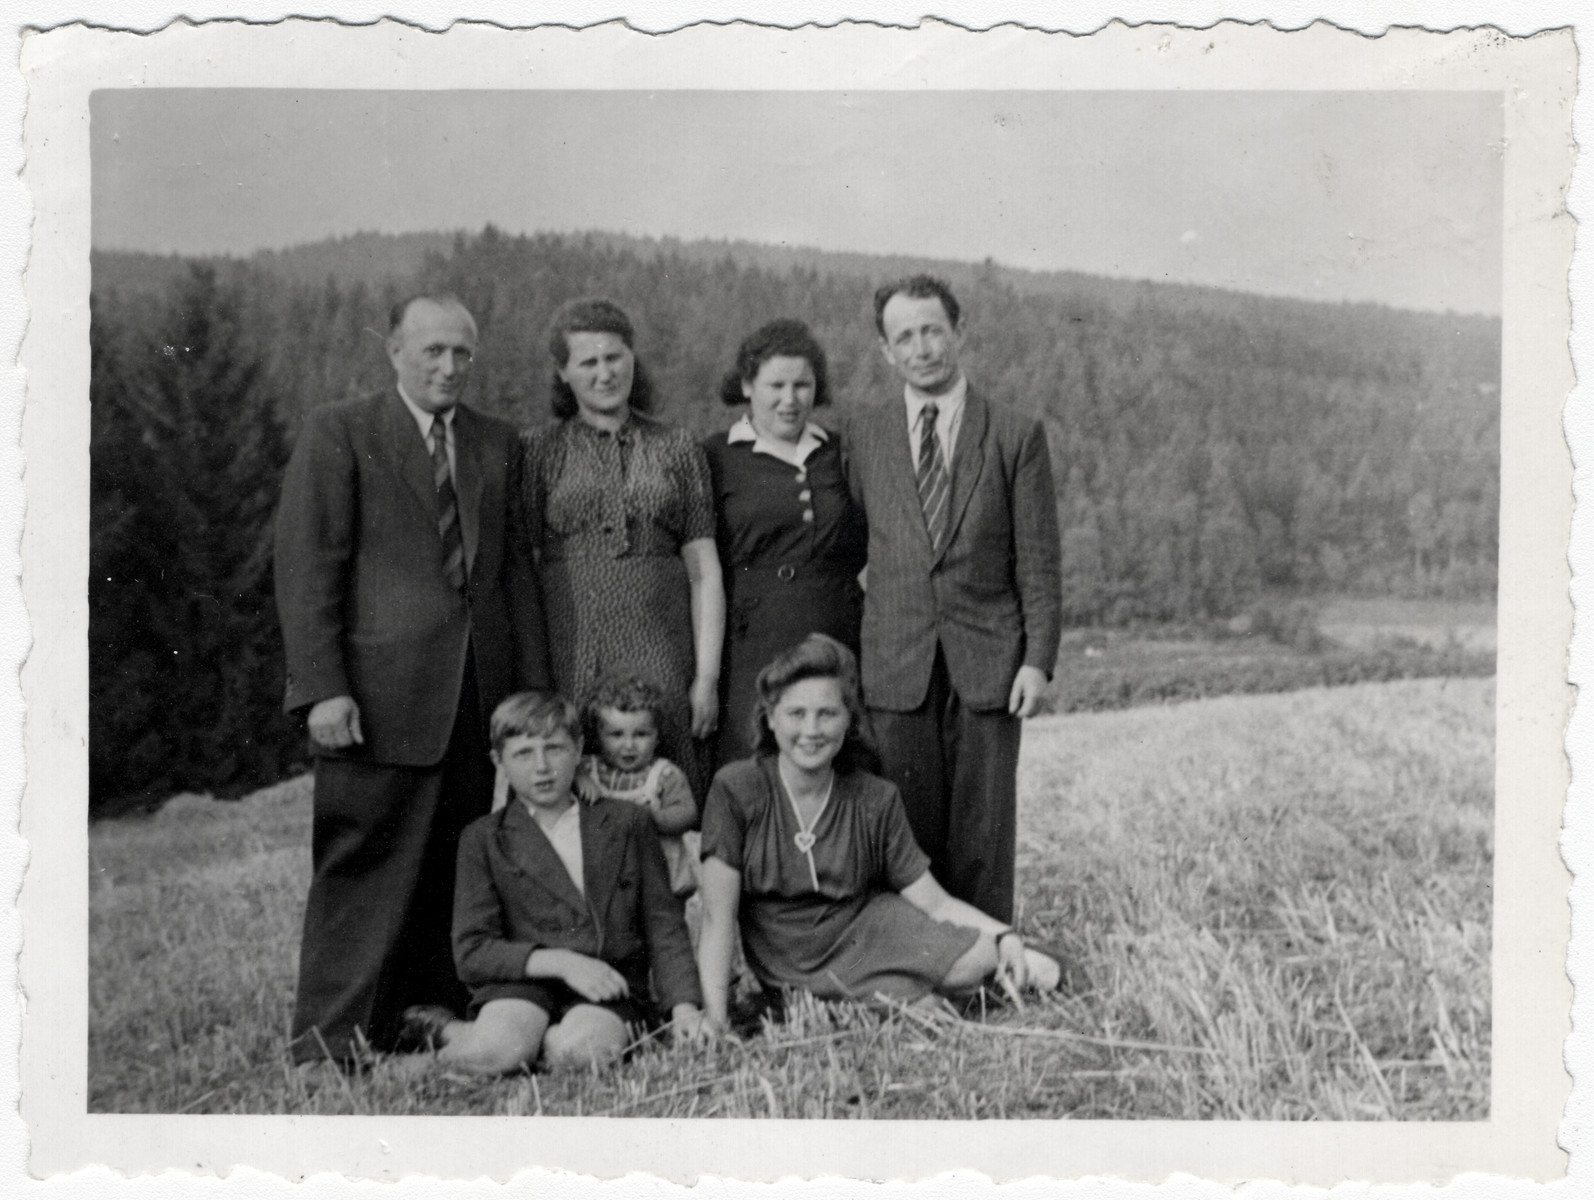 The Malach family poses with their friends and cousins, the Reichmans in Amberg.

Front row: Abraham Malach, Abraham Reichman and Bela Malach.  Standing: Mordka and Chana Malach and Gitl and Mordechai Reichman.